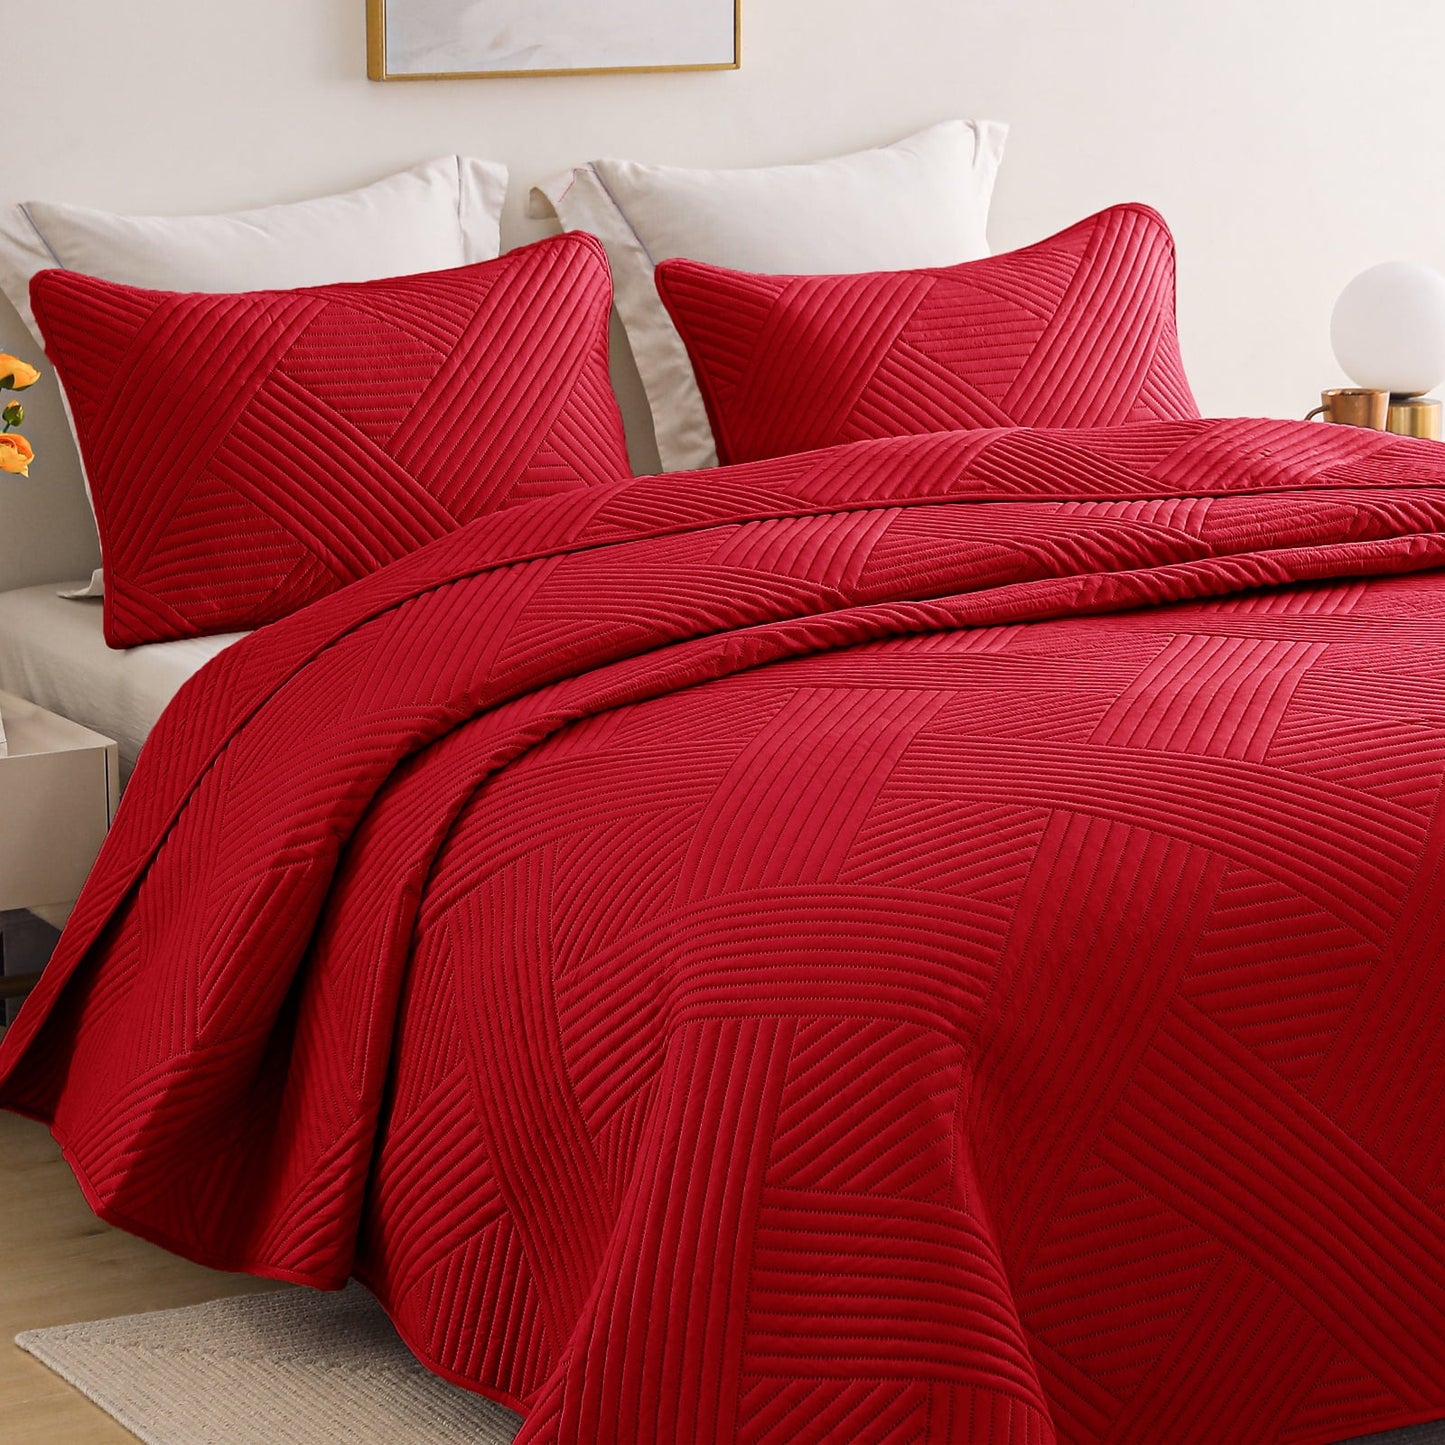 Whale Flotilla California King Quilt Set, Soft Oversized Quilts Bedspread Coverlet Embossed Pattern, Lightweight Reversible Bedding Sets for All Seasons with Pillow Shams, 104x112 Inches, Red